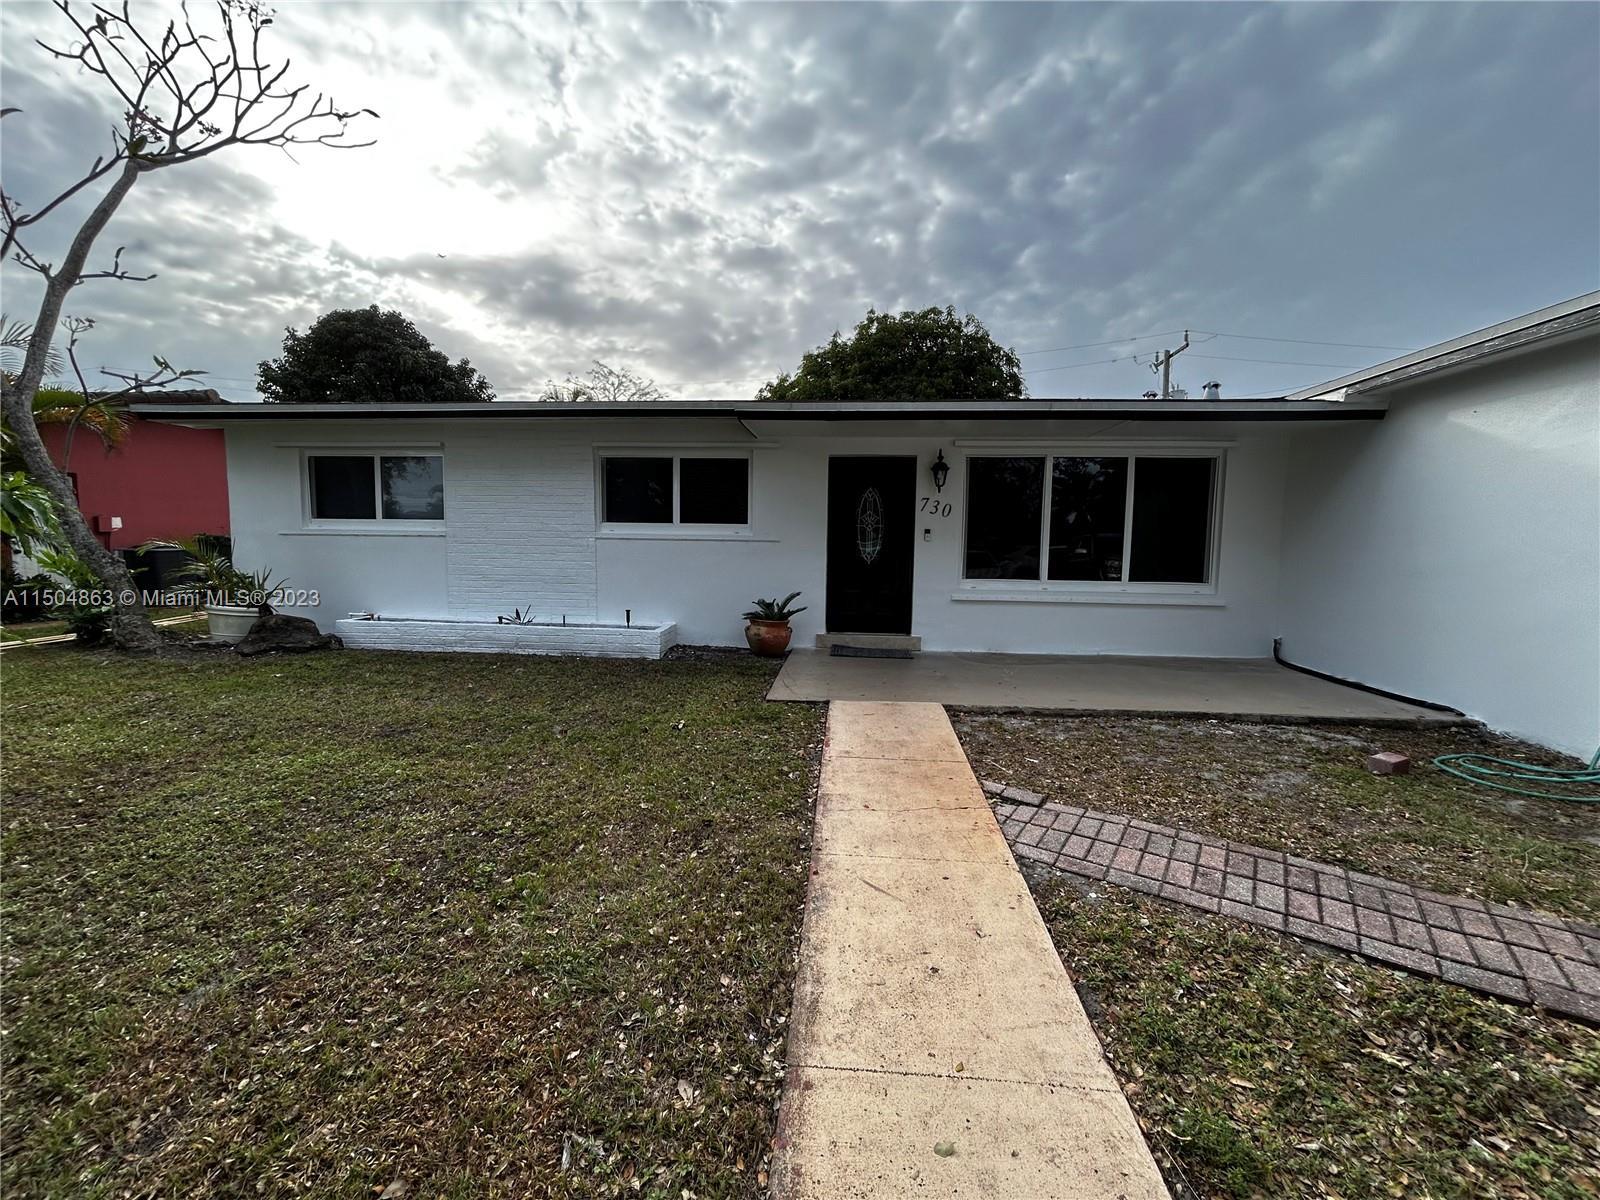 Photo of 730 NW 77th Wy in Pembroke Pines, FL